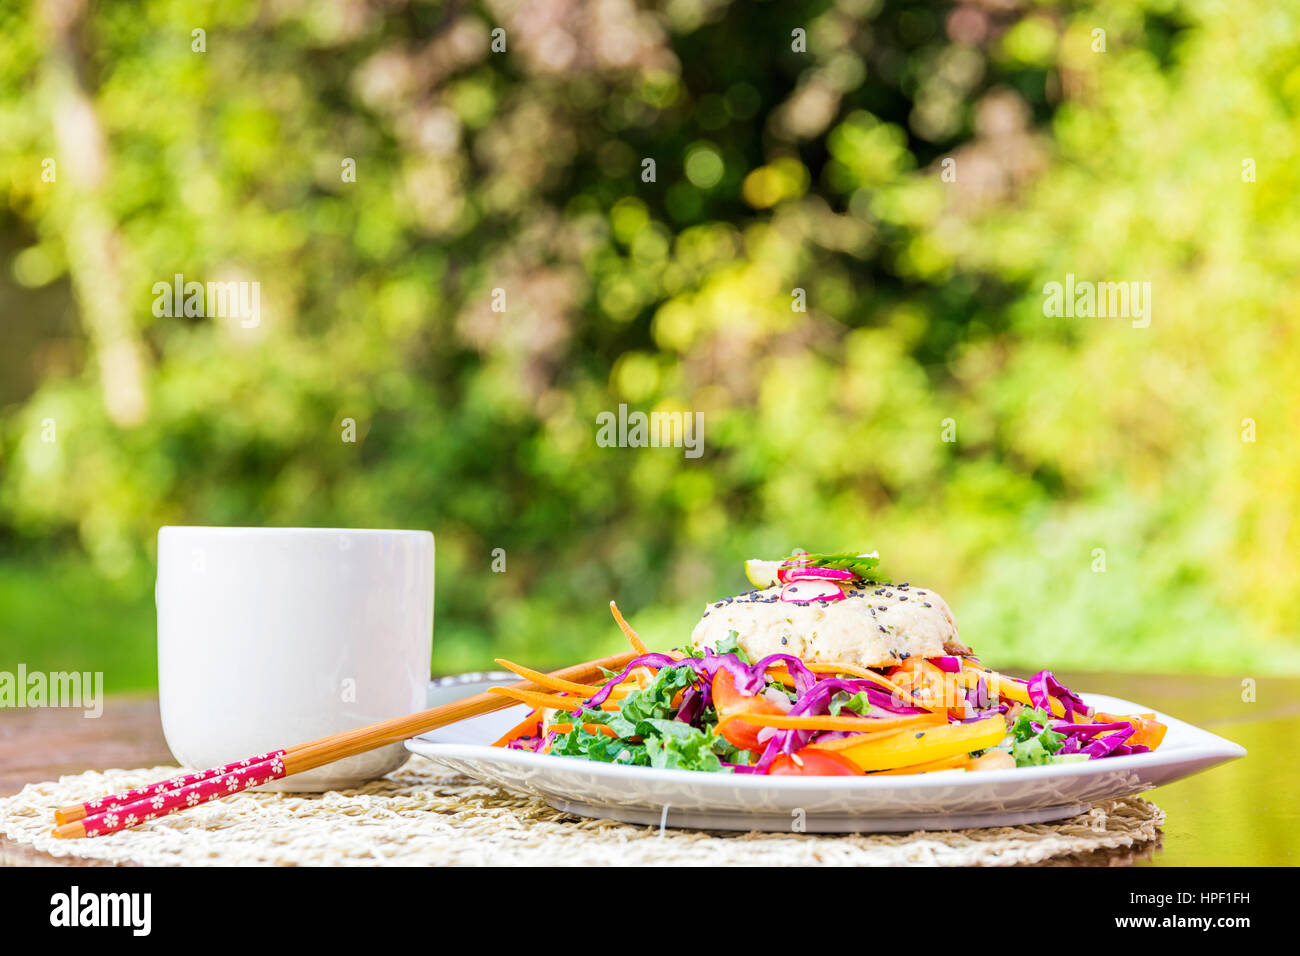 Asian vegetarian burger dish with salad and tea served in a green environment Stock Photo